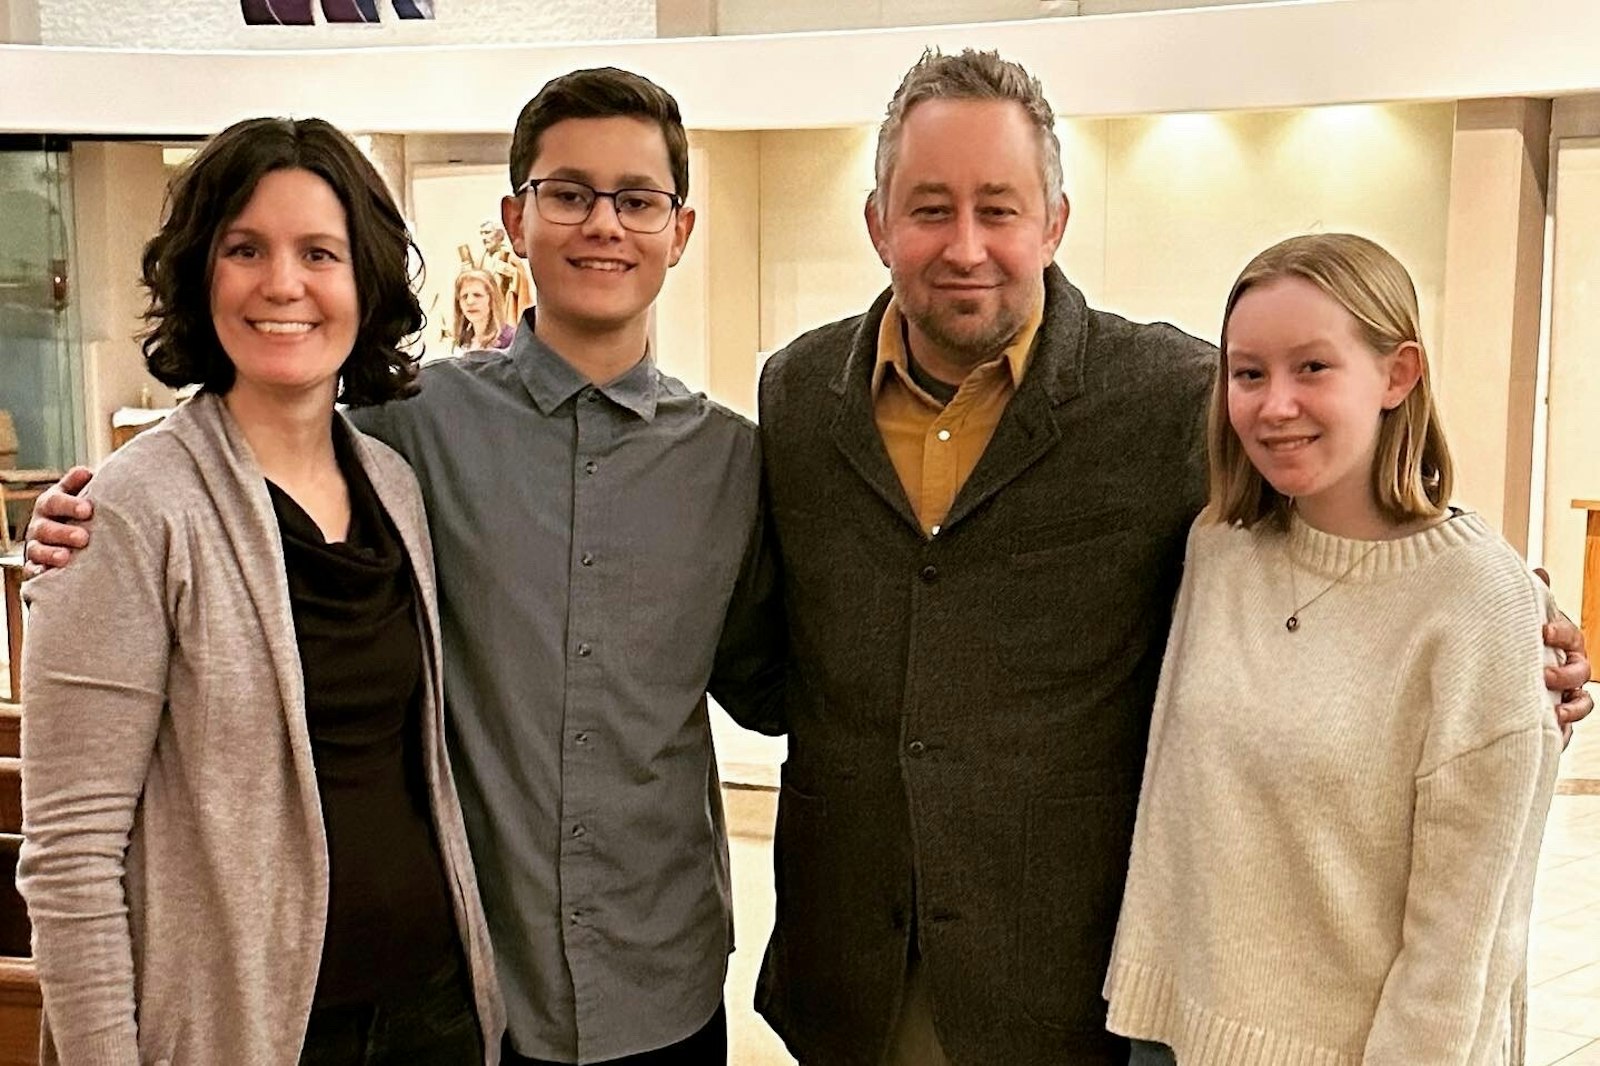 David Gardner, second from right, is pictured with his wife Juliet, son Tyler and daughter Gabrielle during the Rite of Sending this year at St. Andrew Parish in Rochester, where Tyler is currently a catechumen. David Gardner was baptized last year during the Easter vigil at St. Andrew. (Photos courtesy of David Gardner)